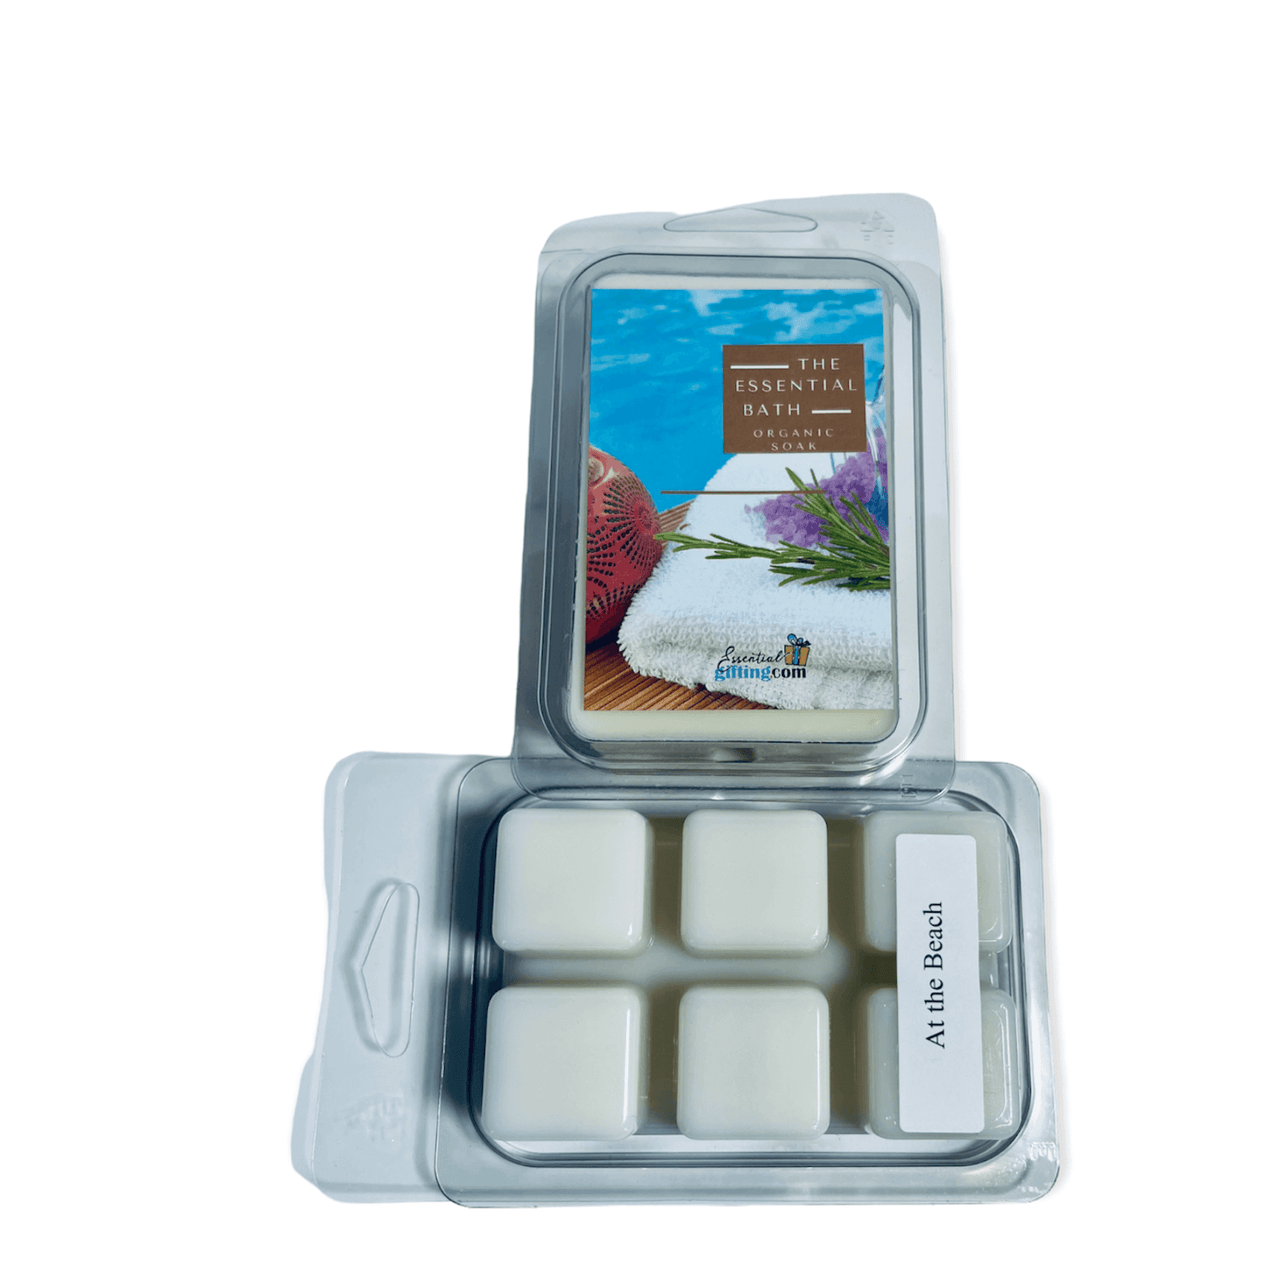 Wellness-inspired "Moments in Life" scented wax melts by Essentialgifting, displayed in a clear case with six individual fragrance compartments.